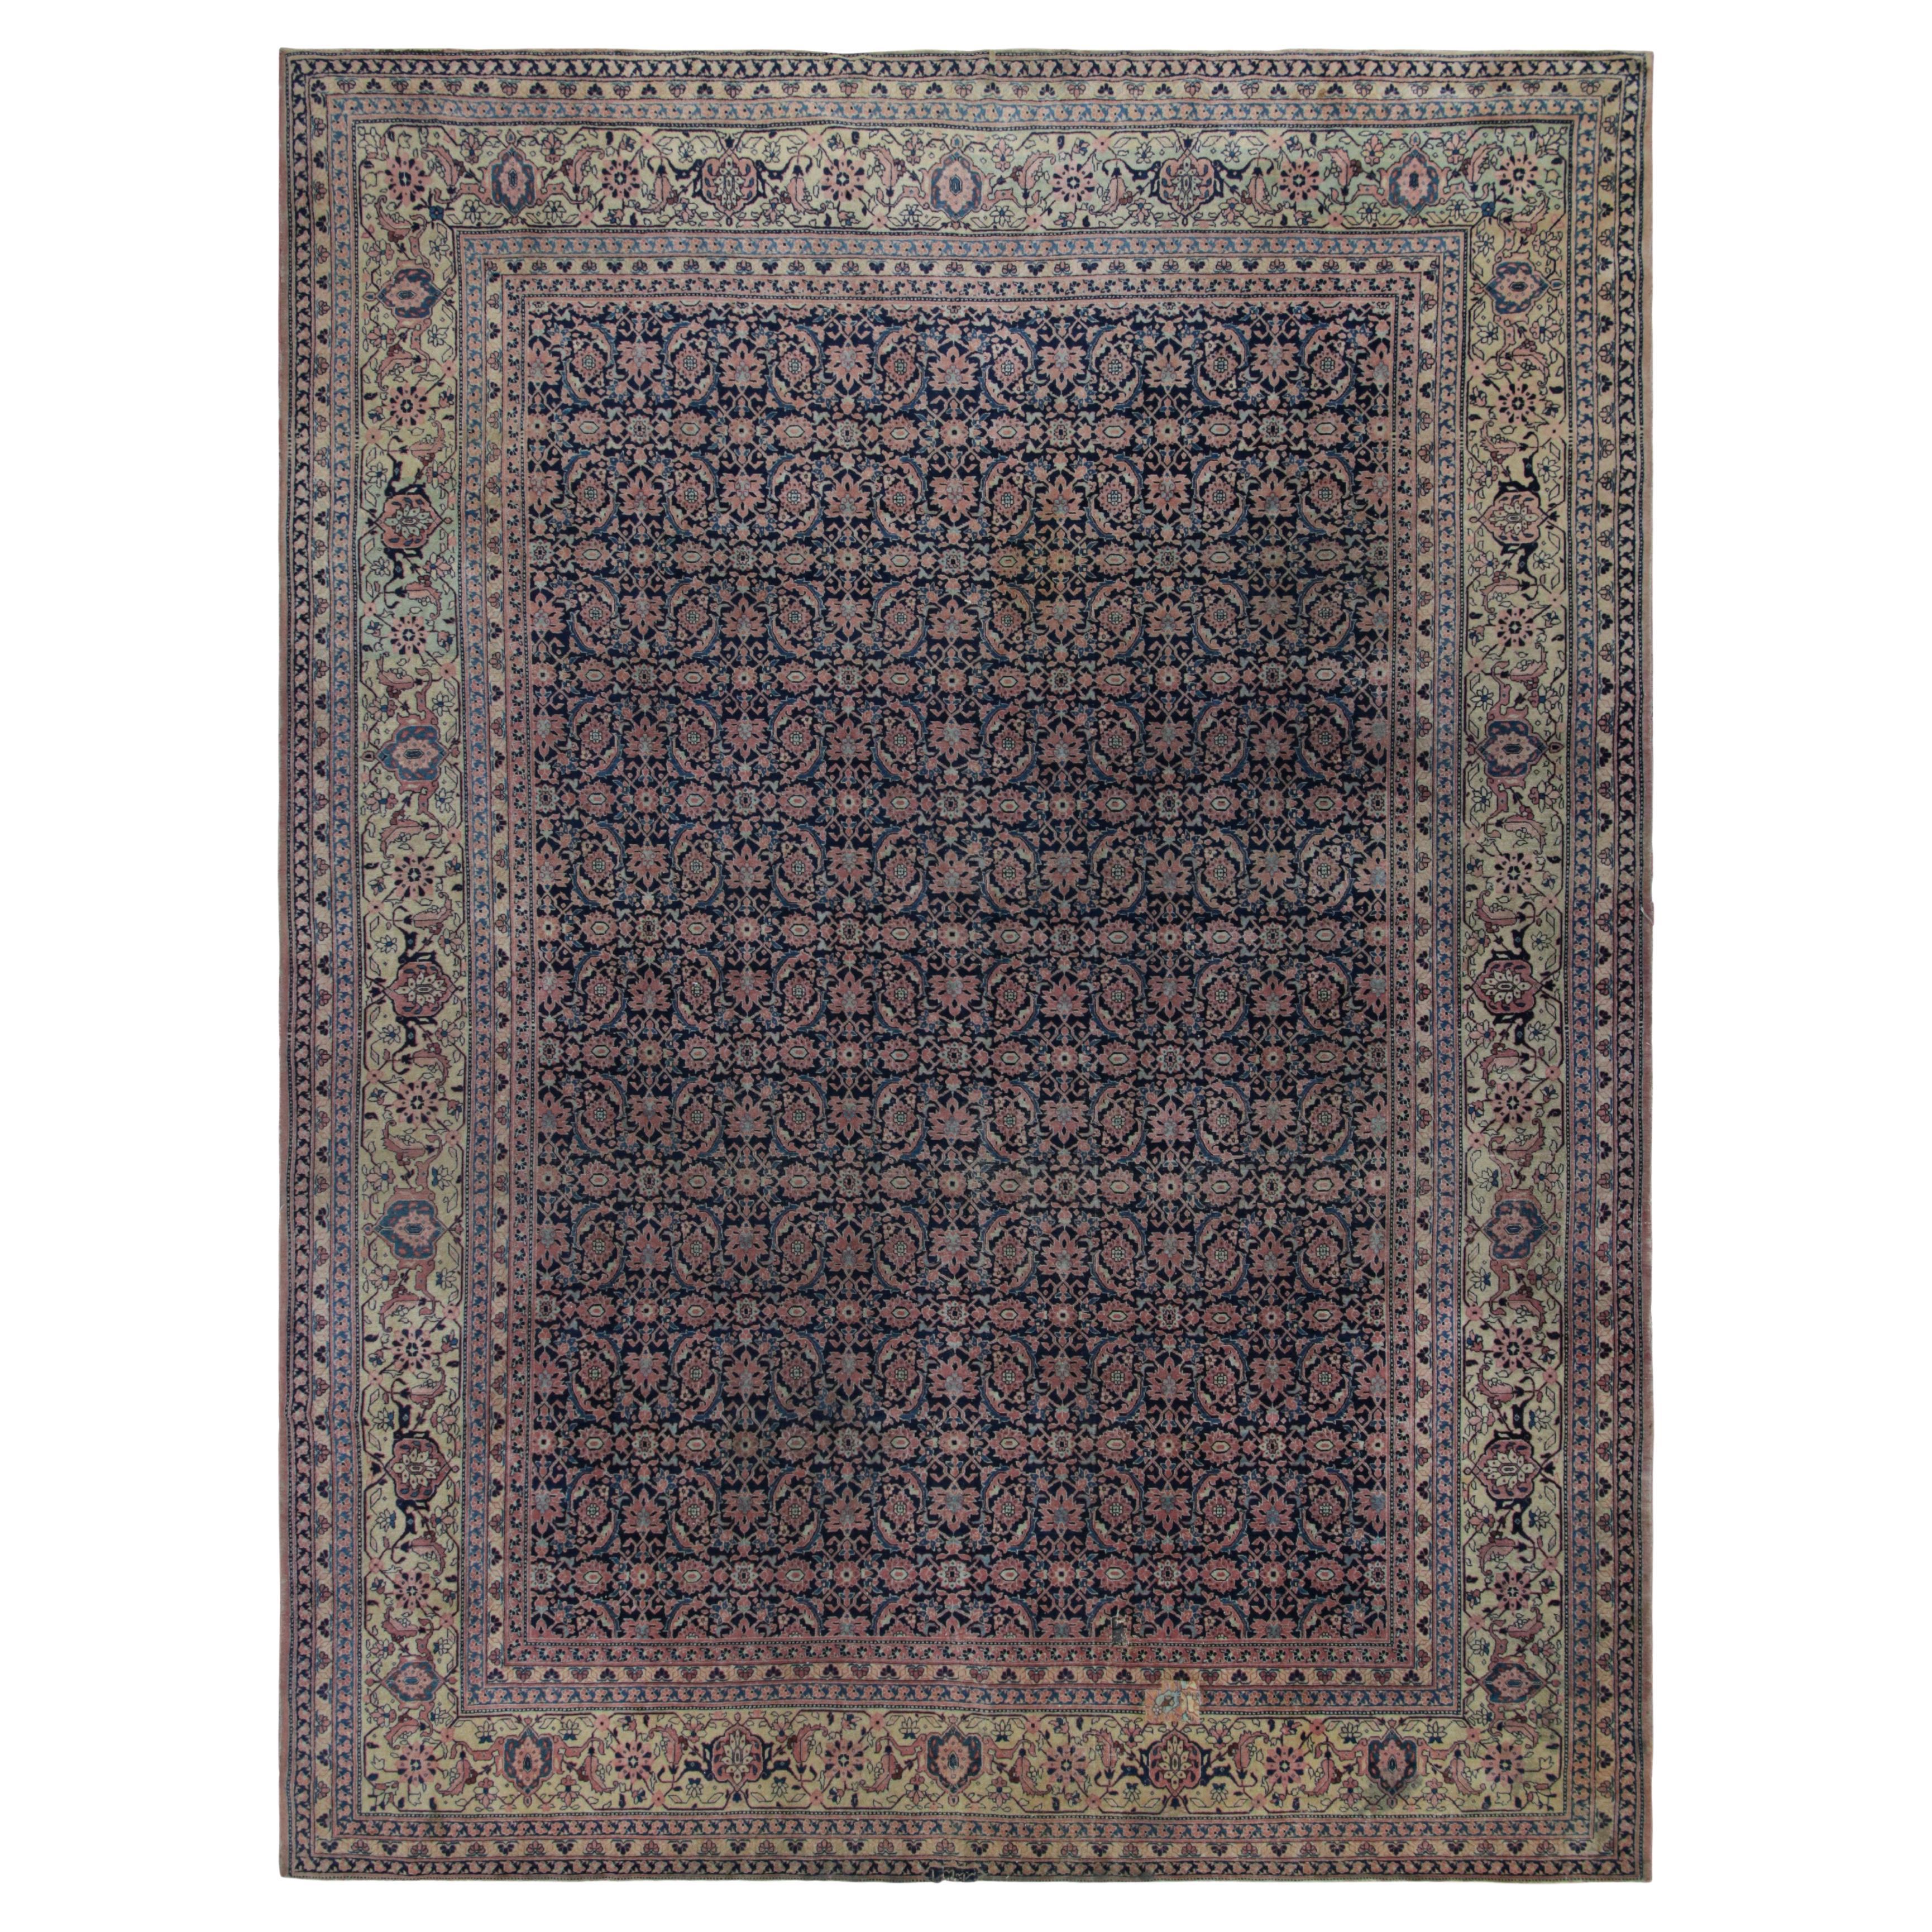 Antique Tabriz Persian Rug in Blue & Gold With Floral Patterns, From Rug & Kilim